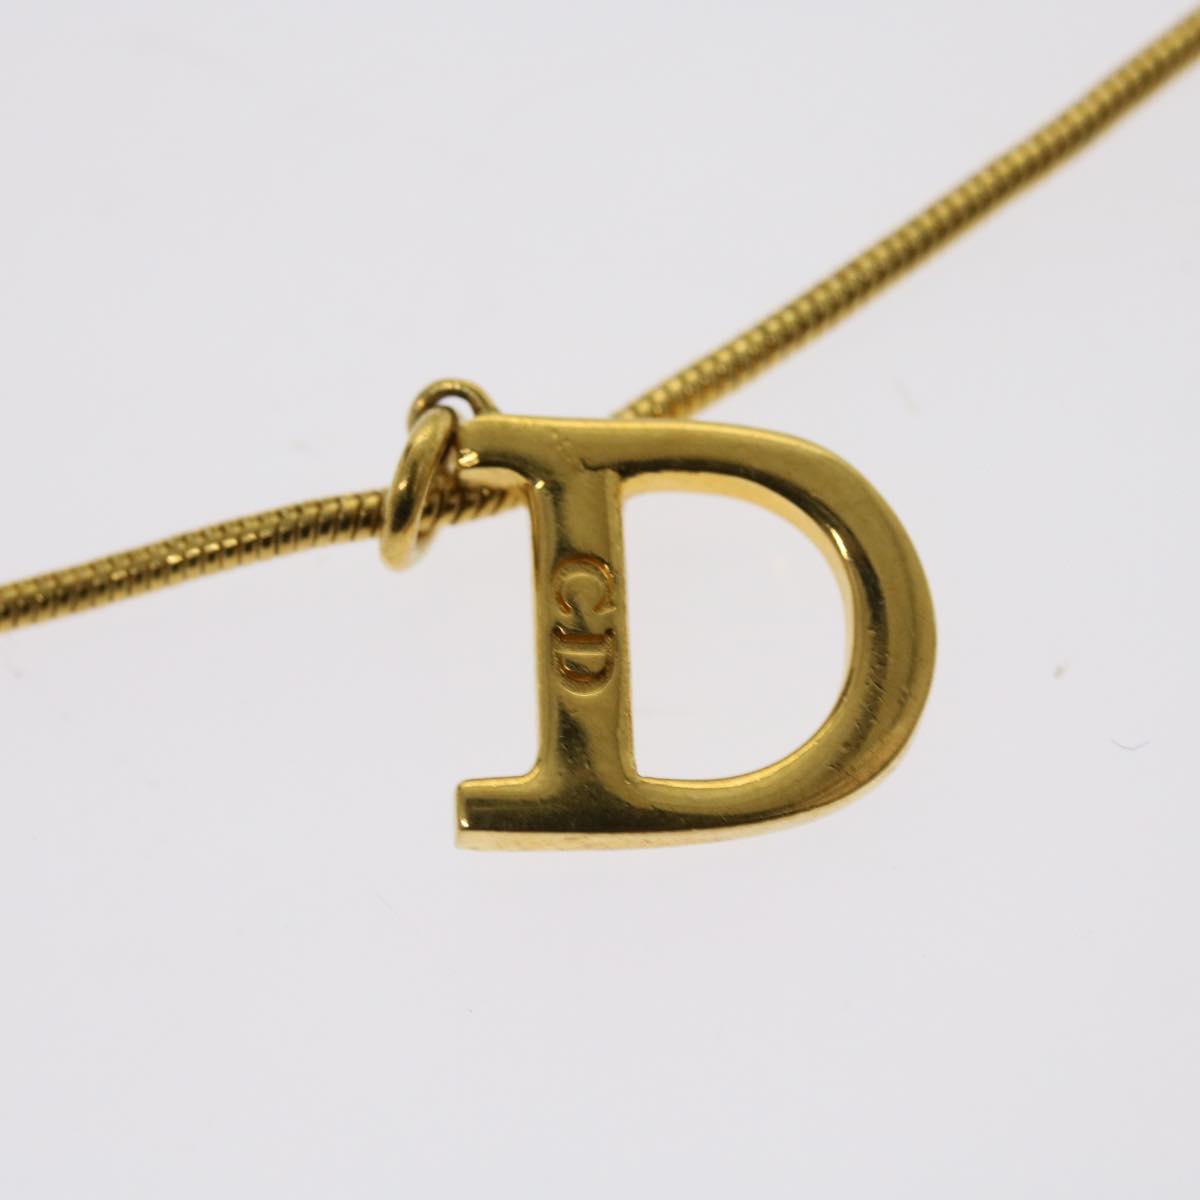 Christian Dior Necklace metal Gold Auth am5563